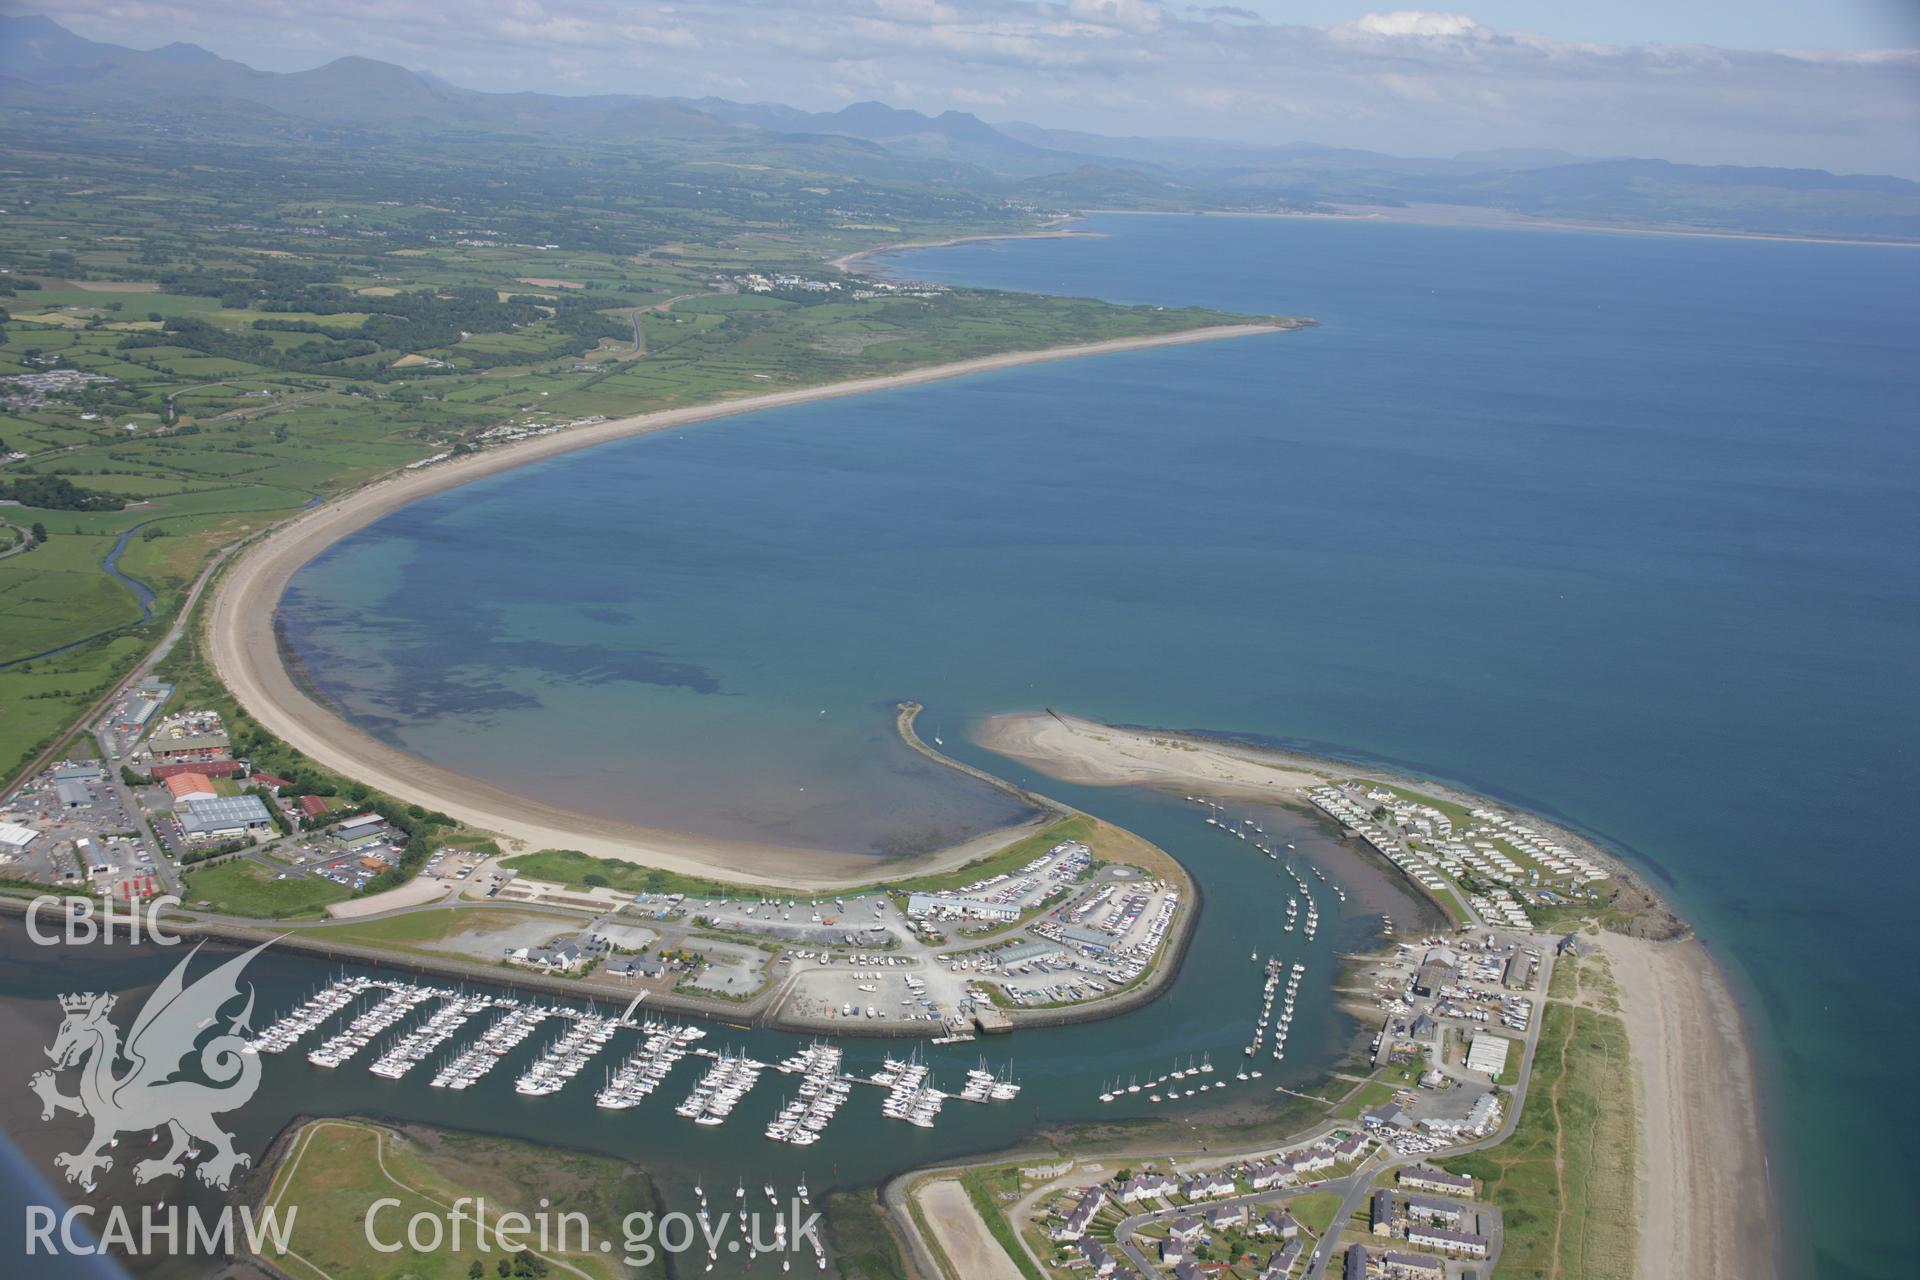 RCAHMW colour oblique aerial photograph of Pwllheli Harbour. A wide landscape view looking east. Taken on 14 June 2006 by Toby Driver.